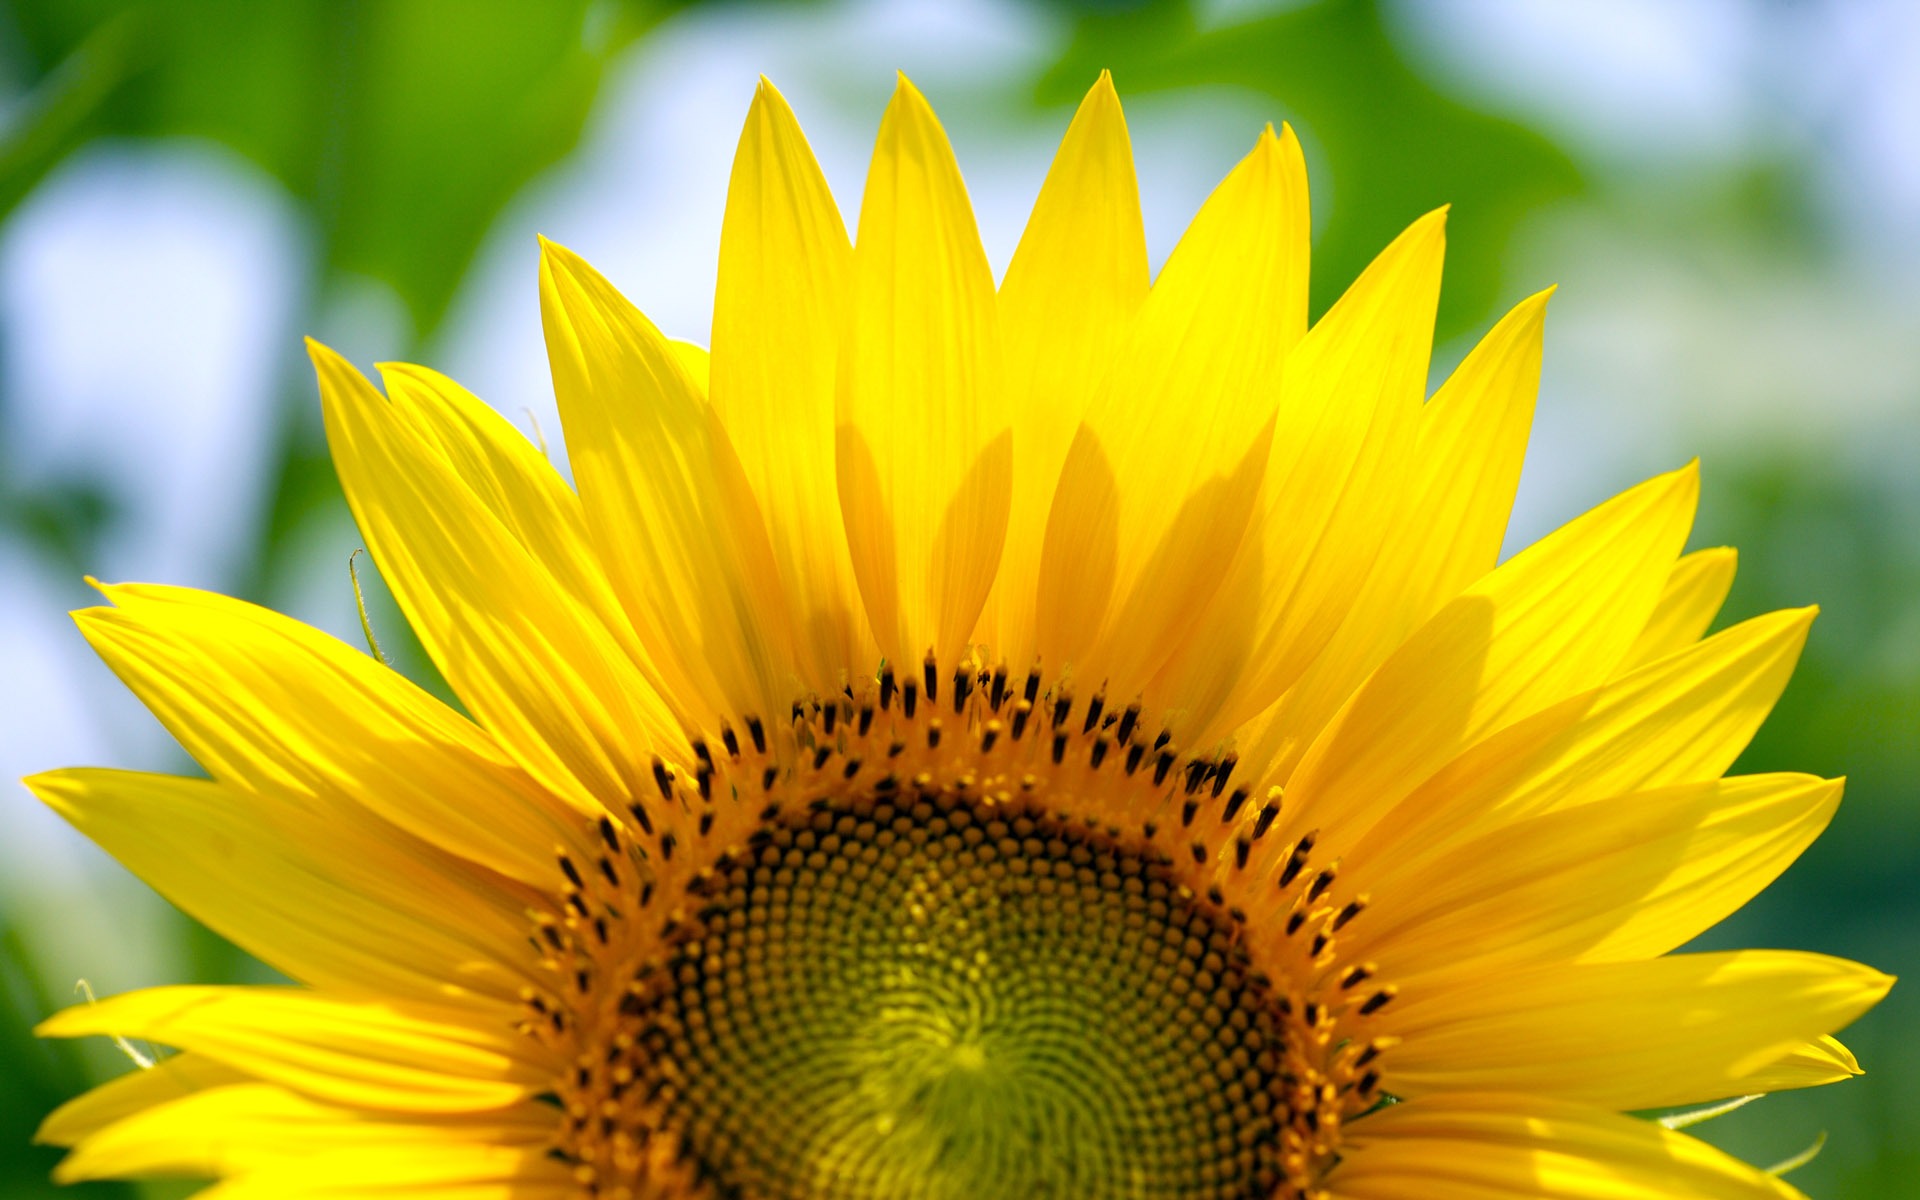 Sunny sunflower photo HD Wallpapers #20 - 1920x1200